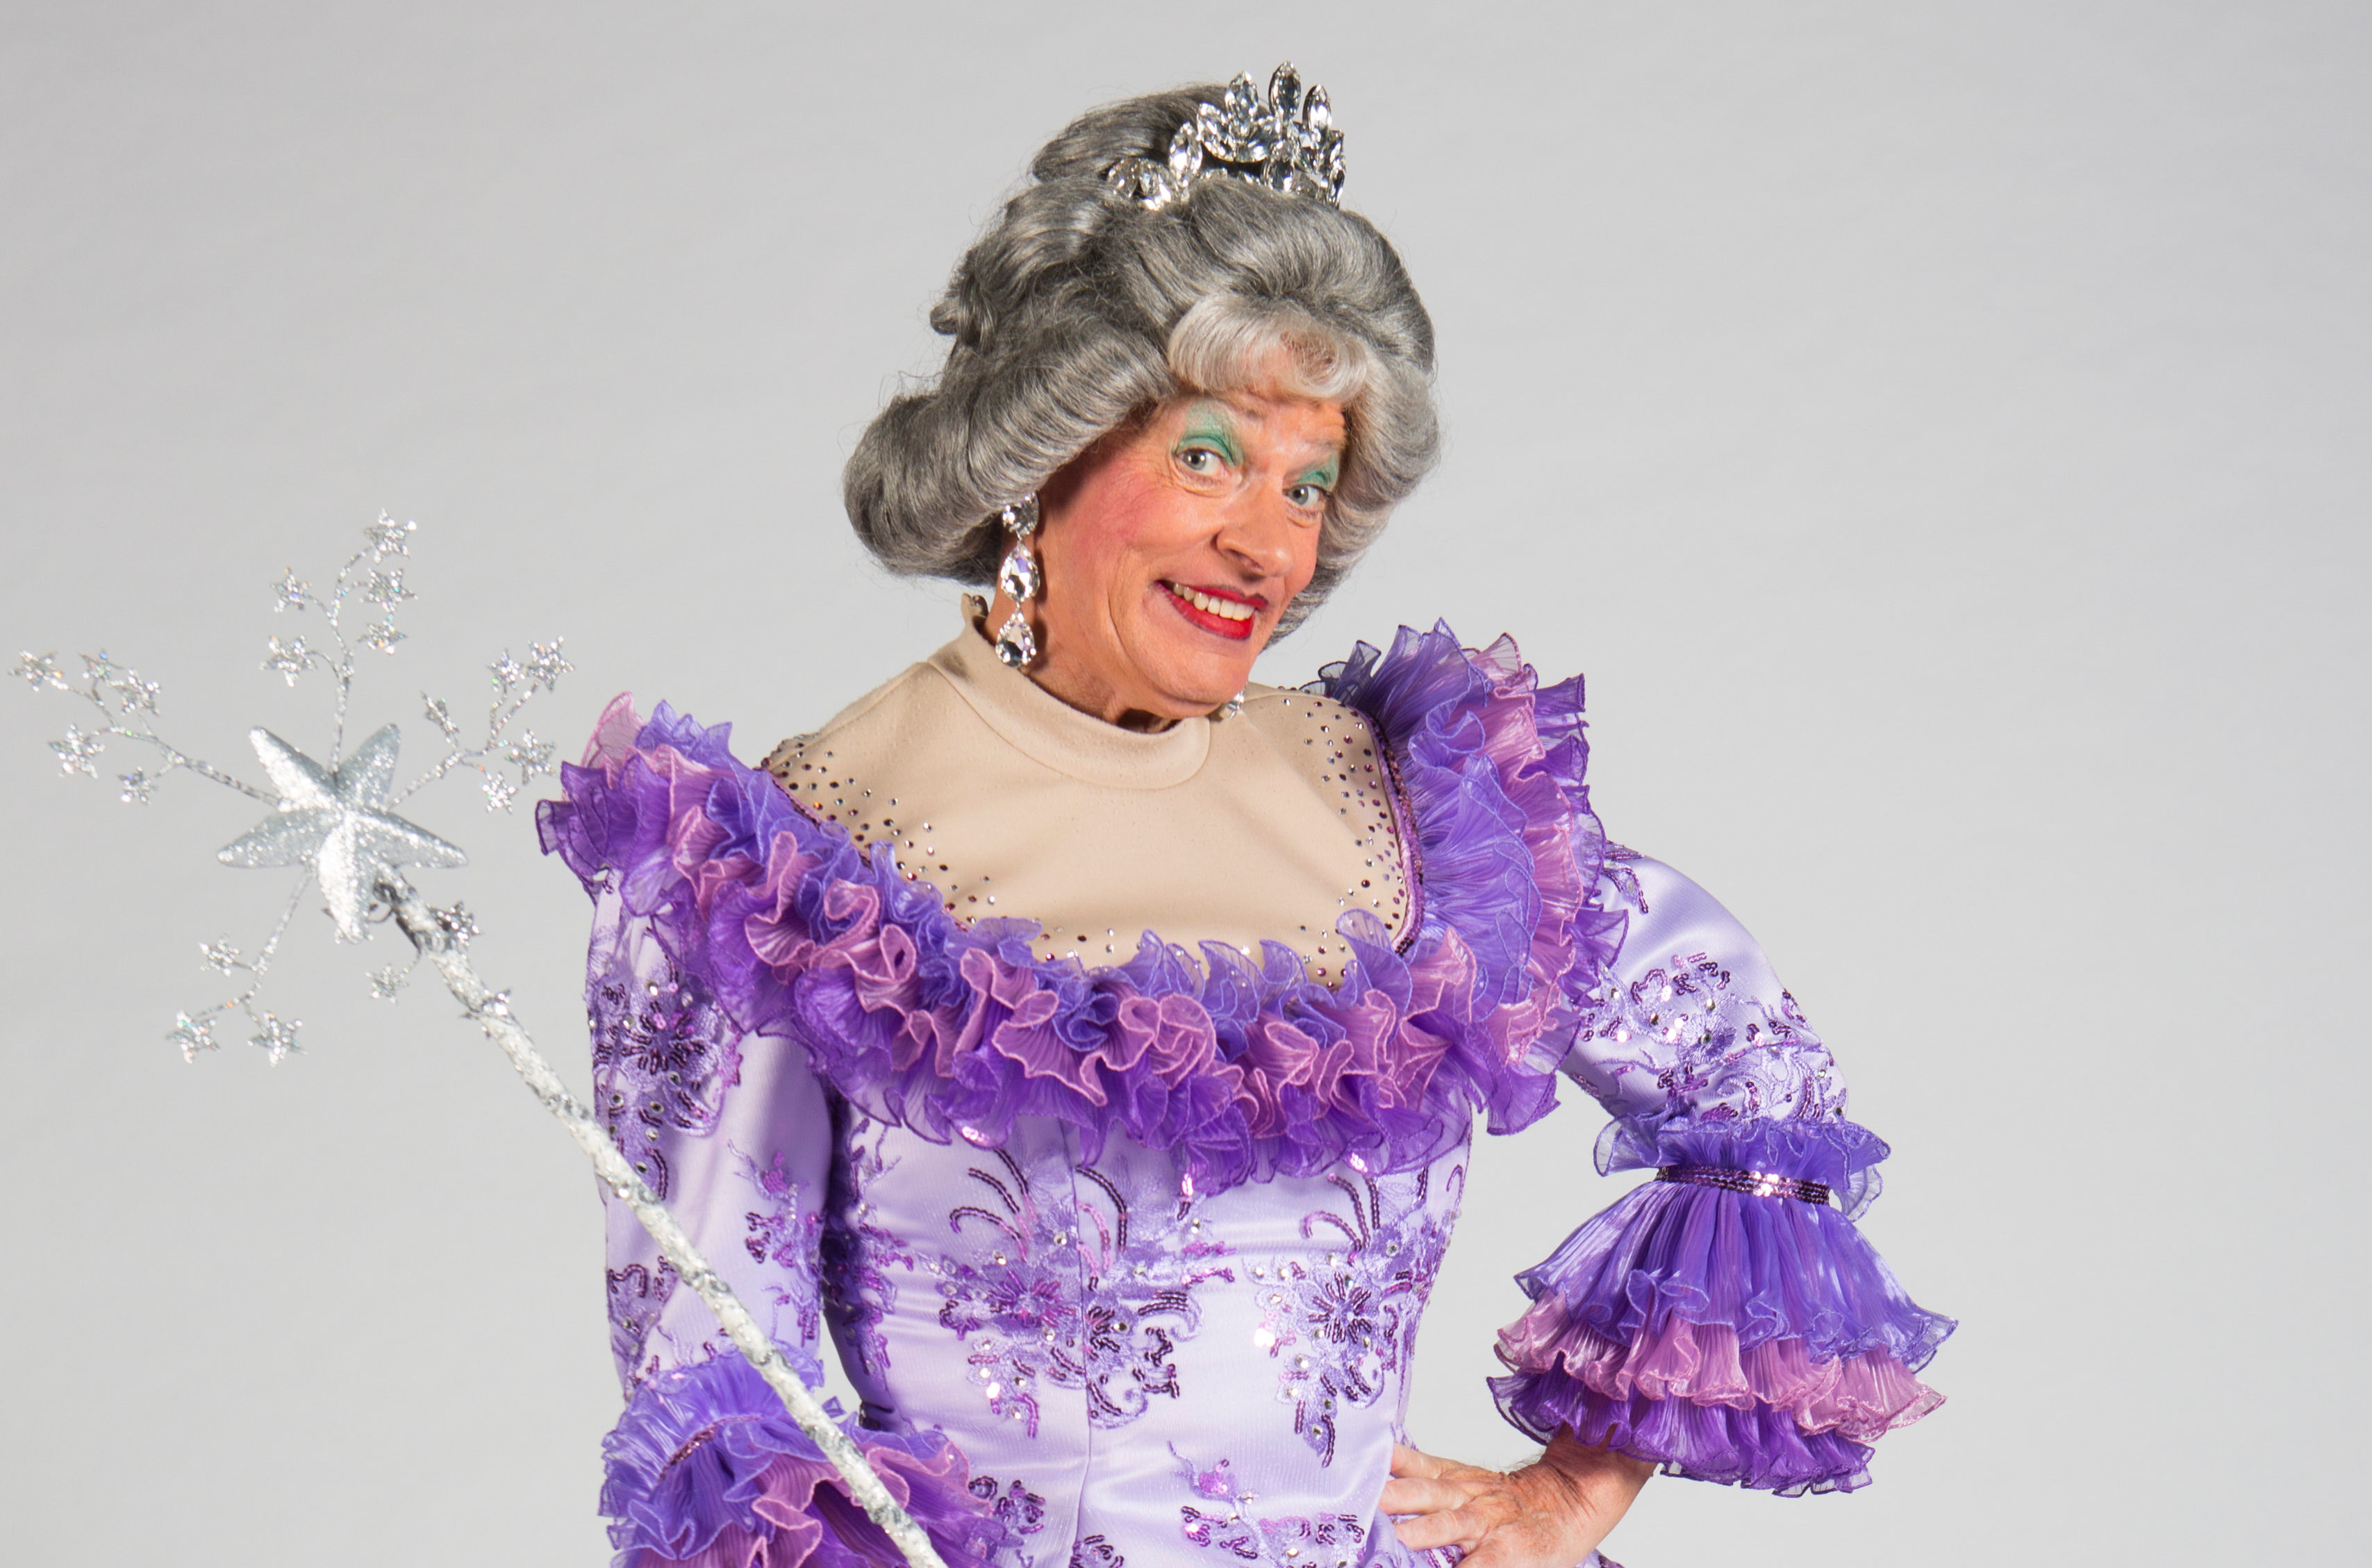 Allan Stewart in character as a panto dame